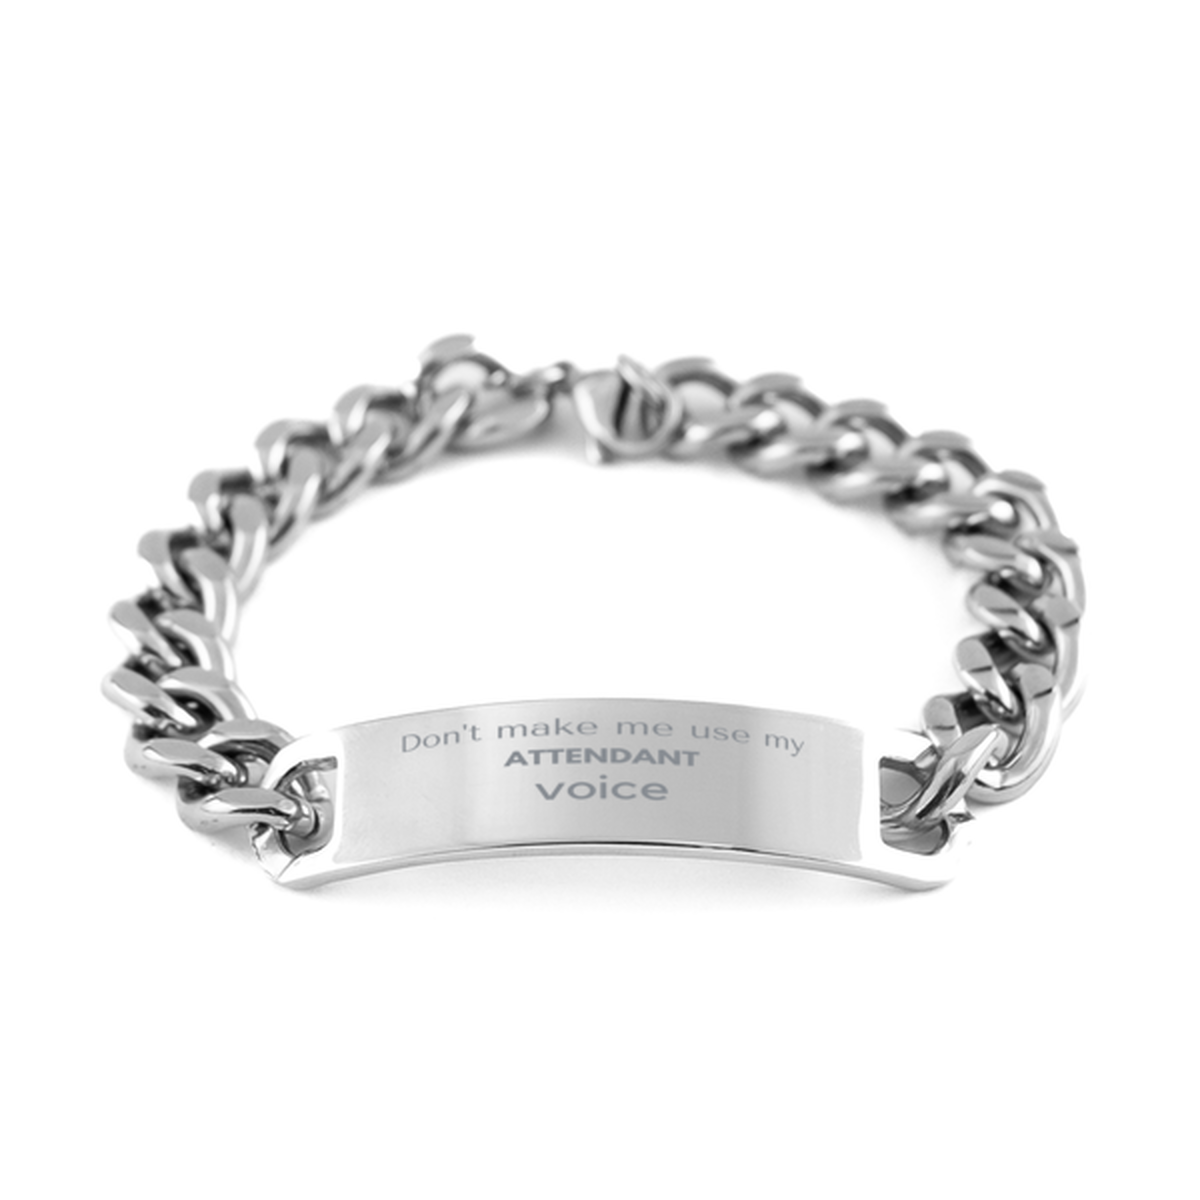 Don't make me use my Attendant voice, Sarcasm Attendant Gifts, Christmas Attendant Cuban Chain Stainless Steel Bracelet Birthday Unique Gifts For Attendant Coworkers, Men, Women, Colleague, Friends